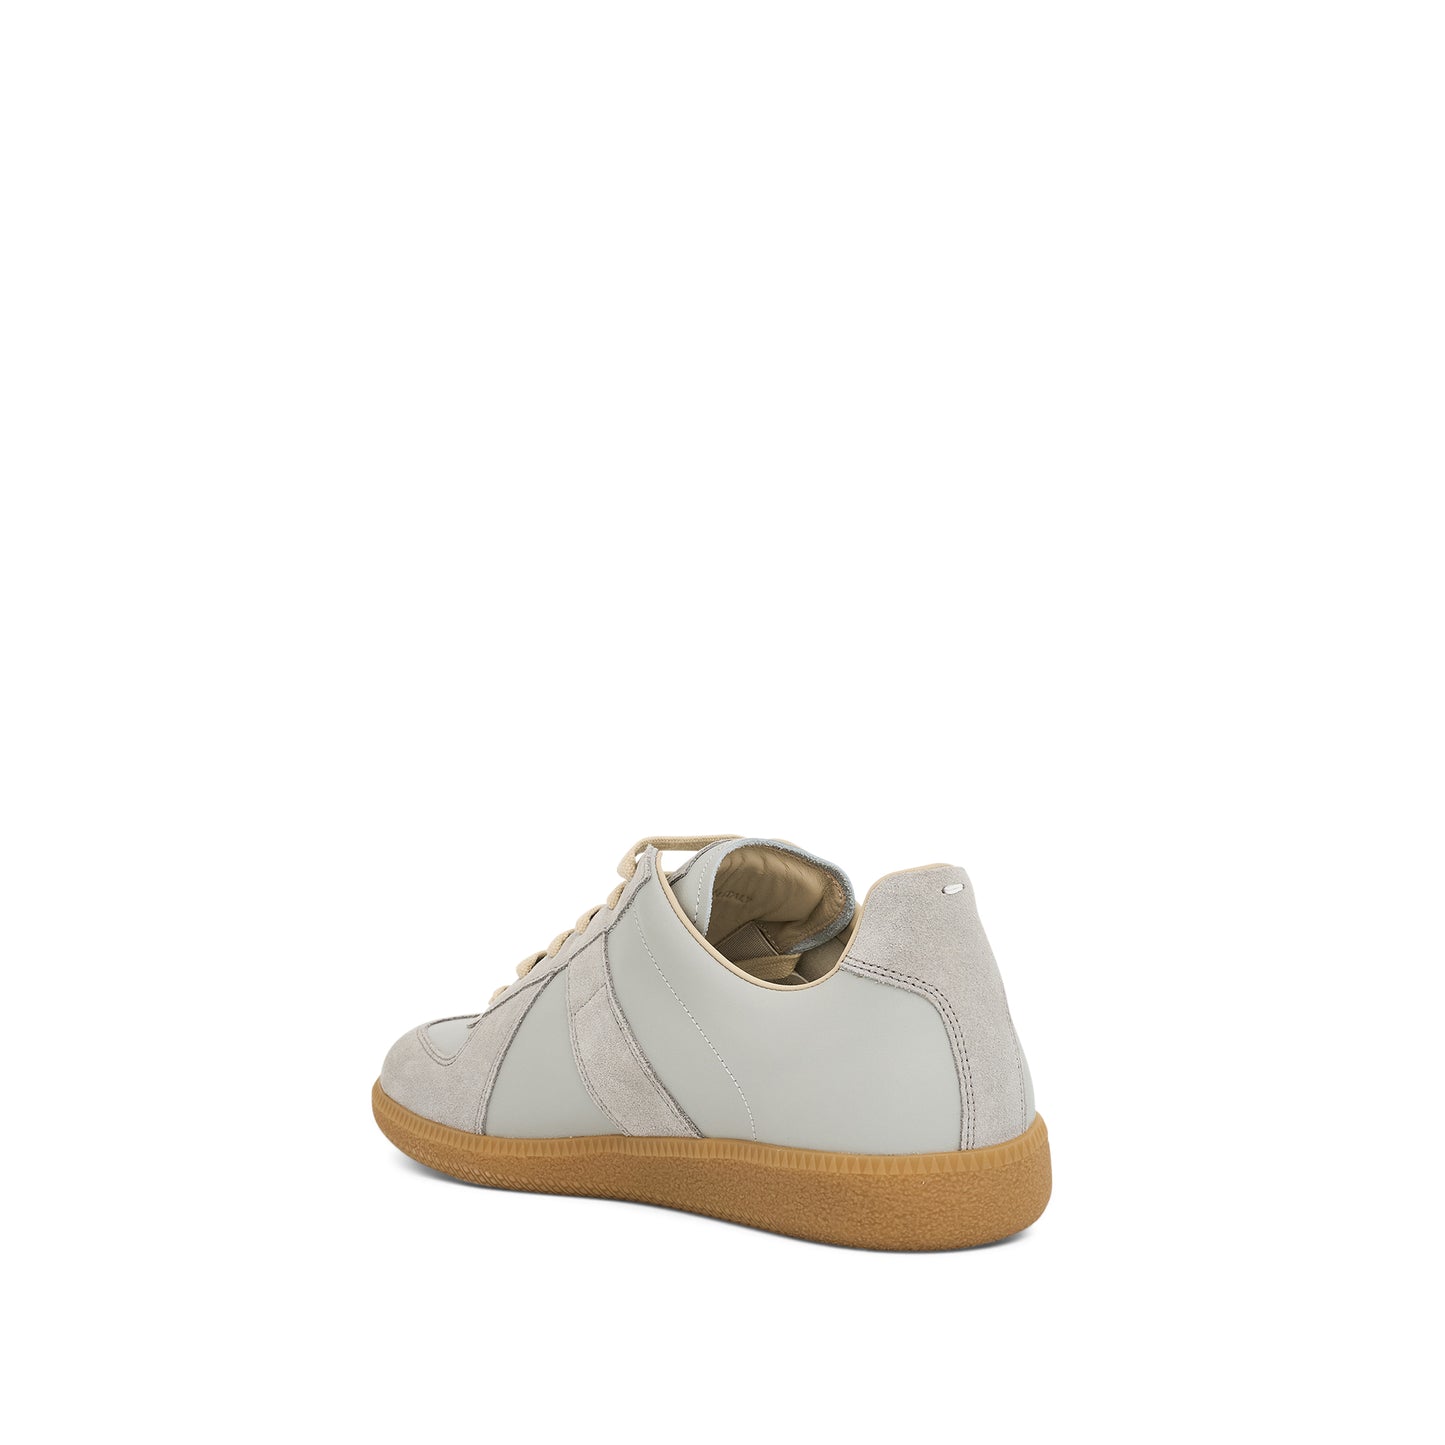 Replica Leather Sneakers in Anisette